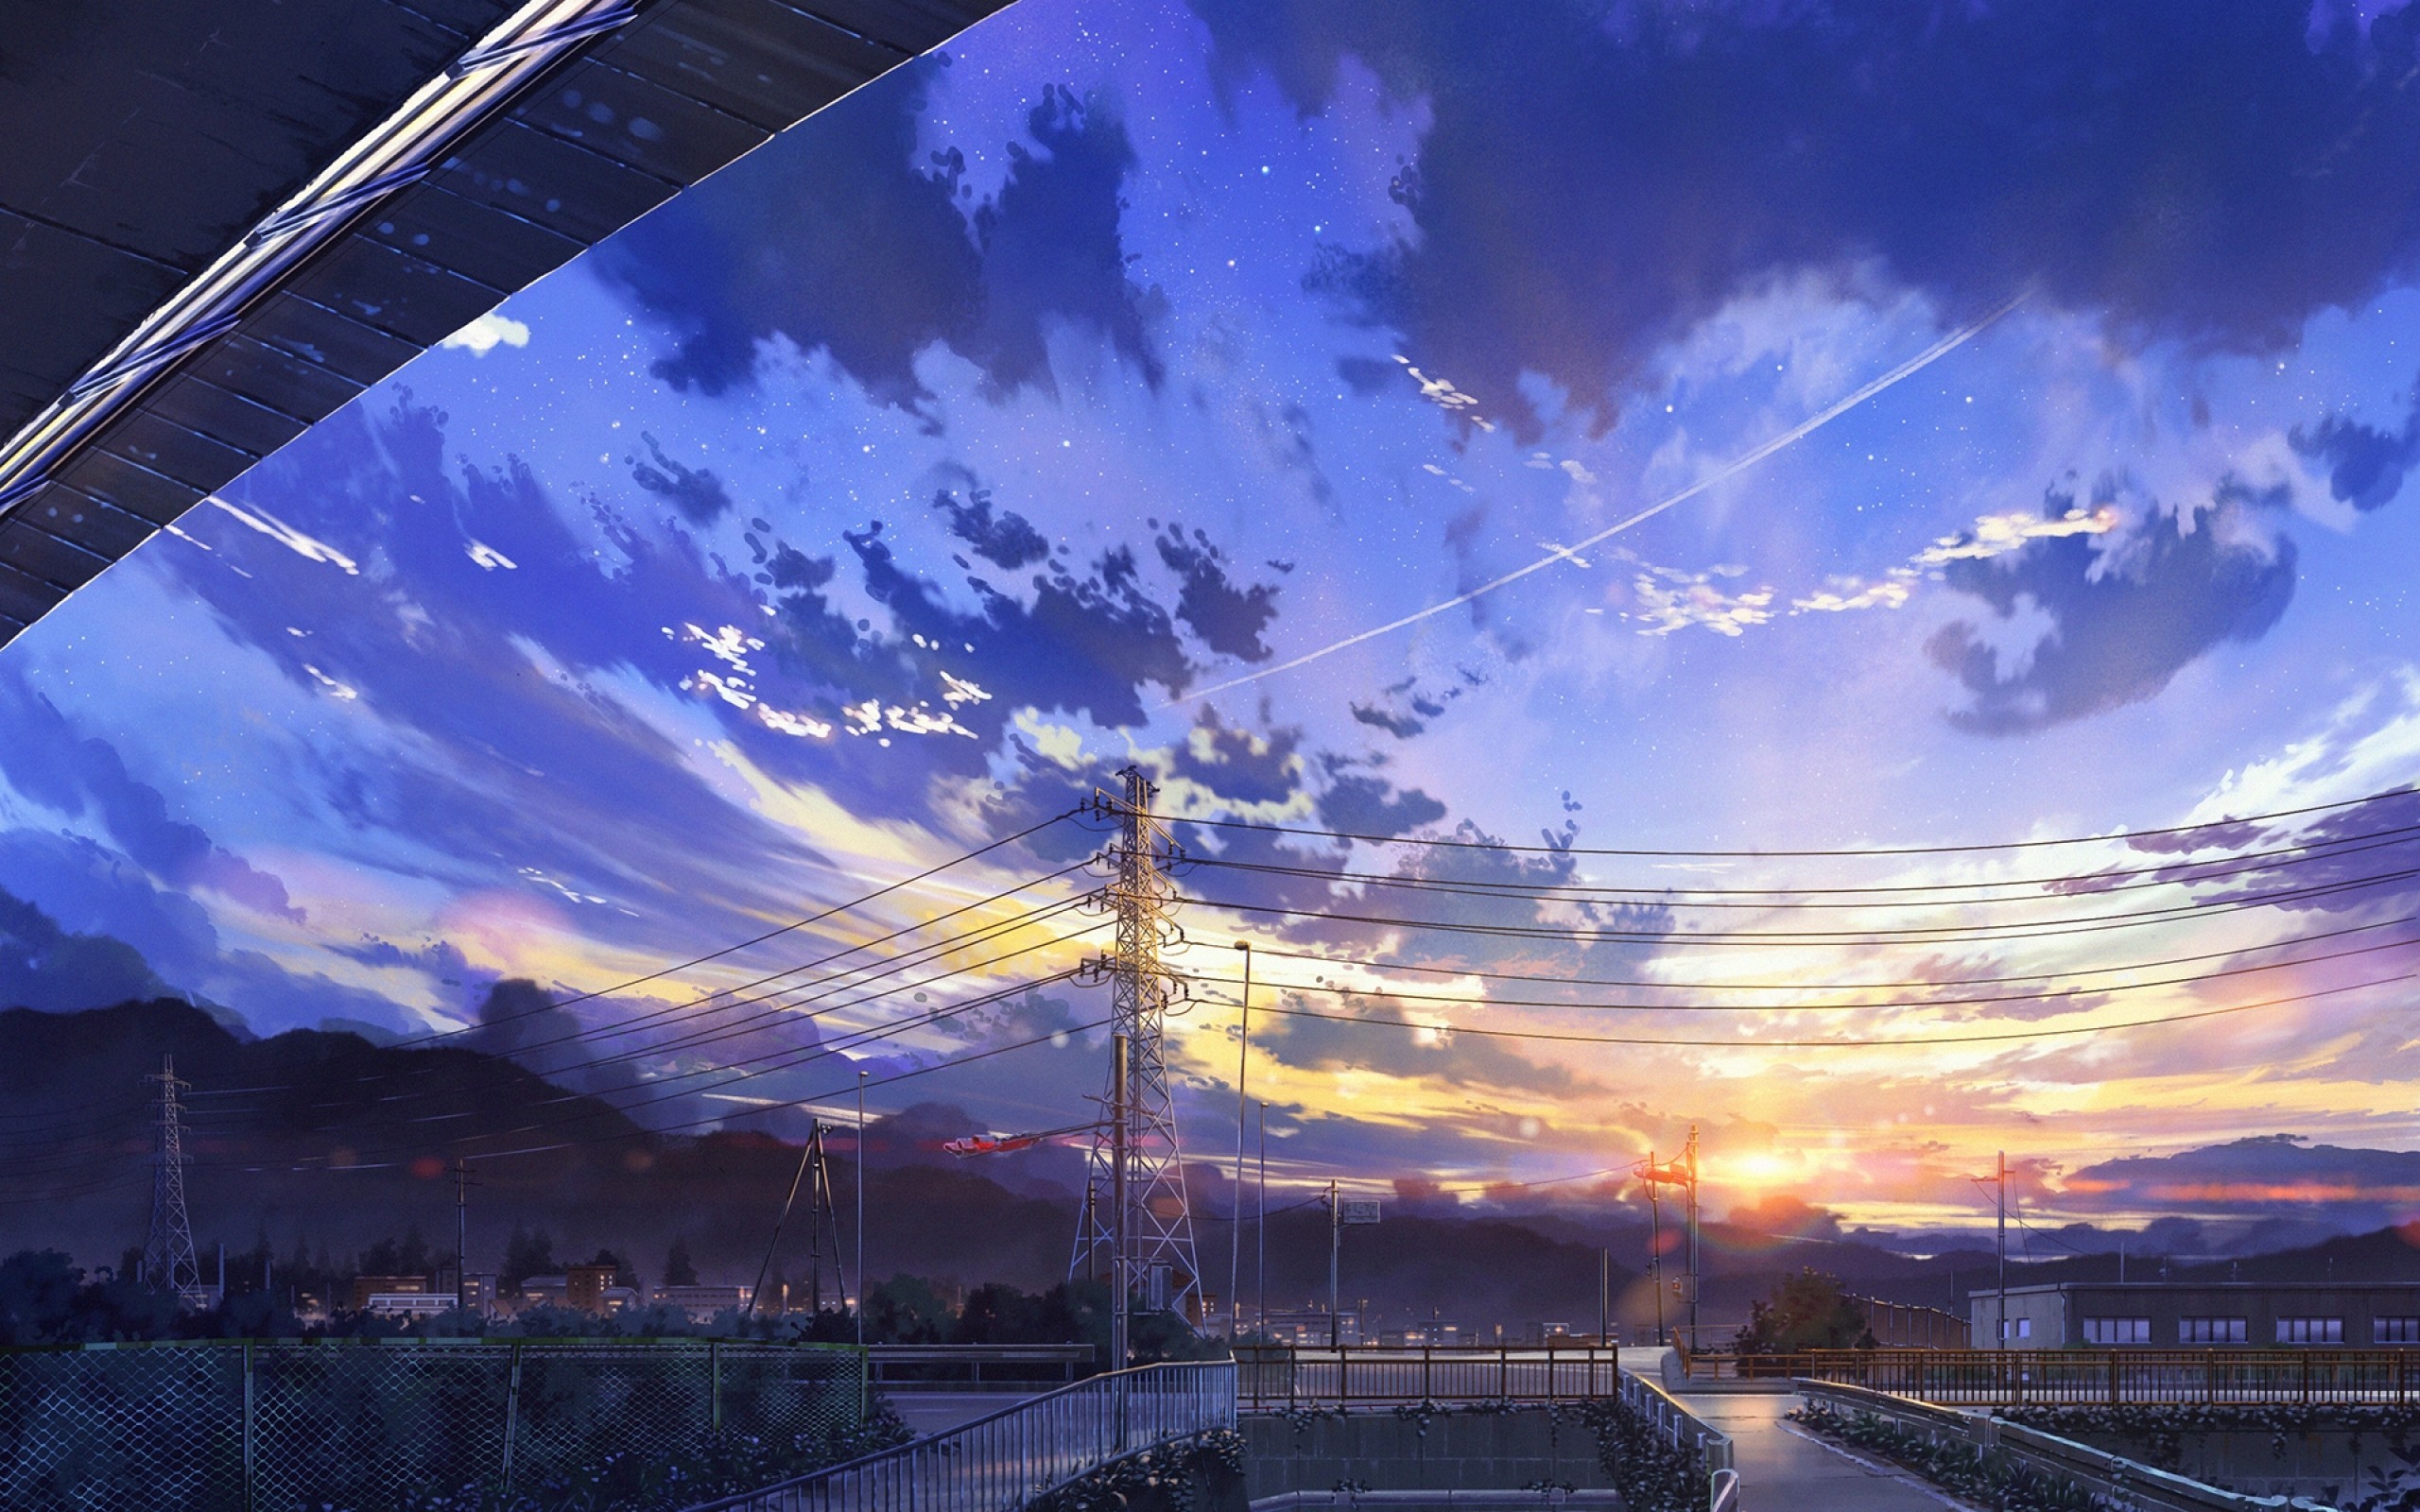 Free Download Download 2560x1600 Anime Landscape Scenery Clouds Stars 2560x1600 For Your Desktop Mobile Tablet Explore 28 Wallpapers 2560x1600 2560x1600 Hd Wallpaper 2560x1600 Wallpapers High Resolution Wallpaper 2560x1600